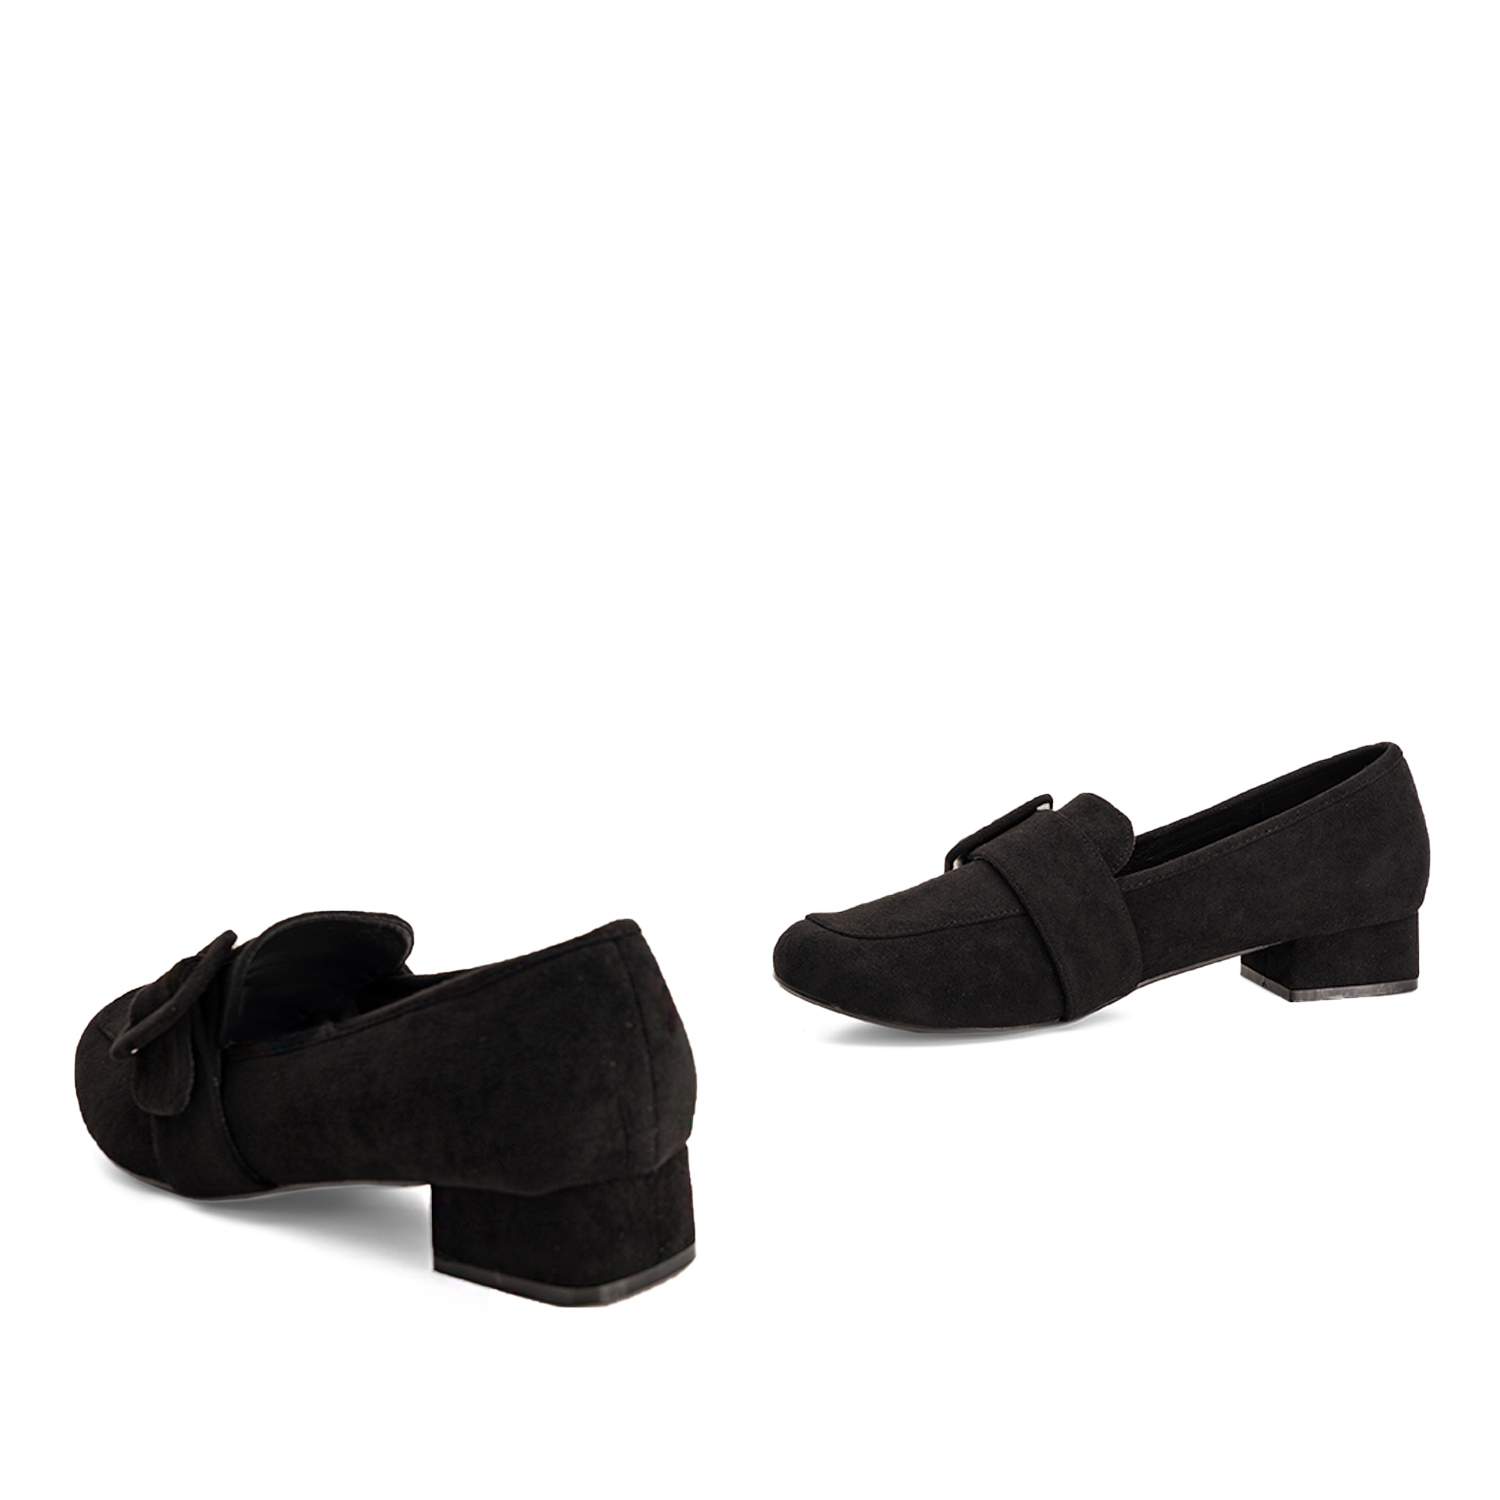 Moccasins in black faux suede and buckle detail 